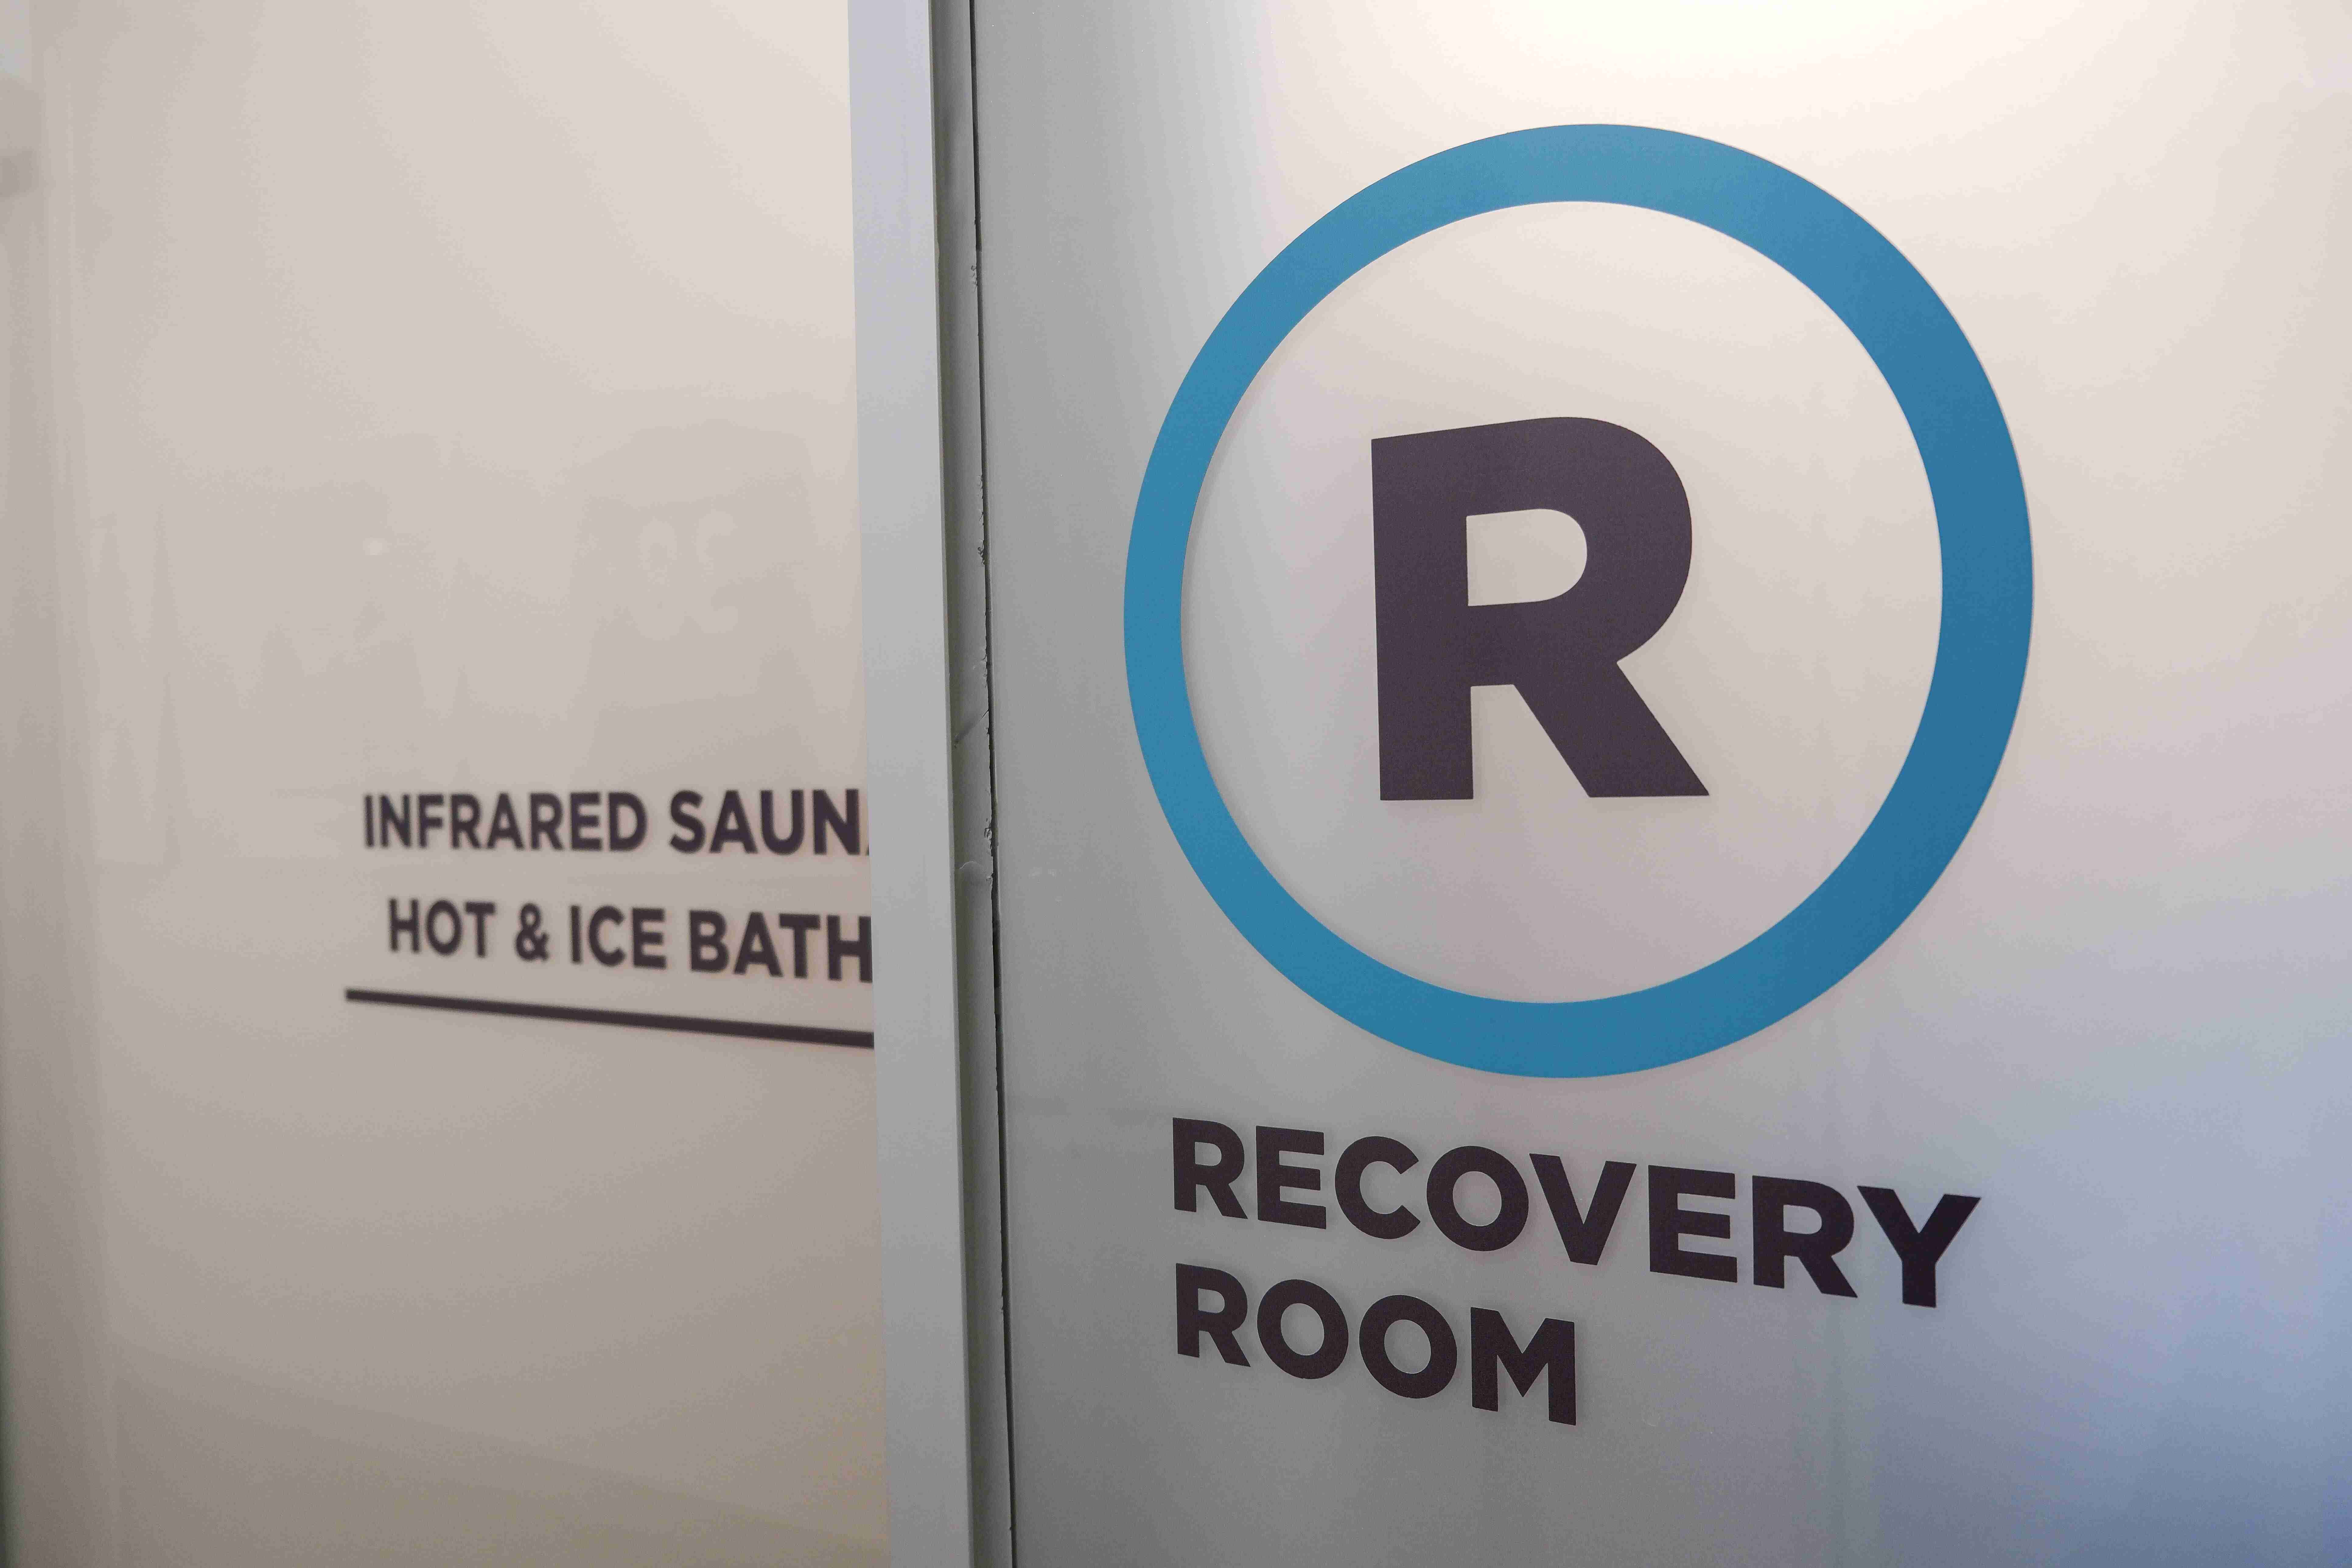 Recovery Room